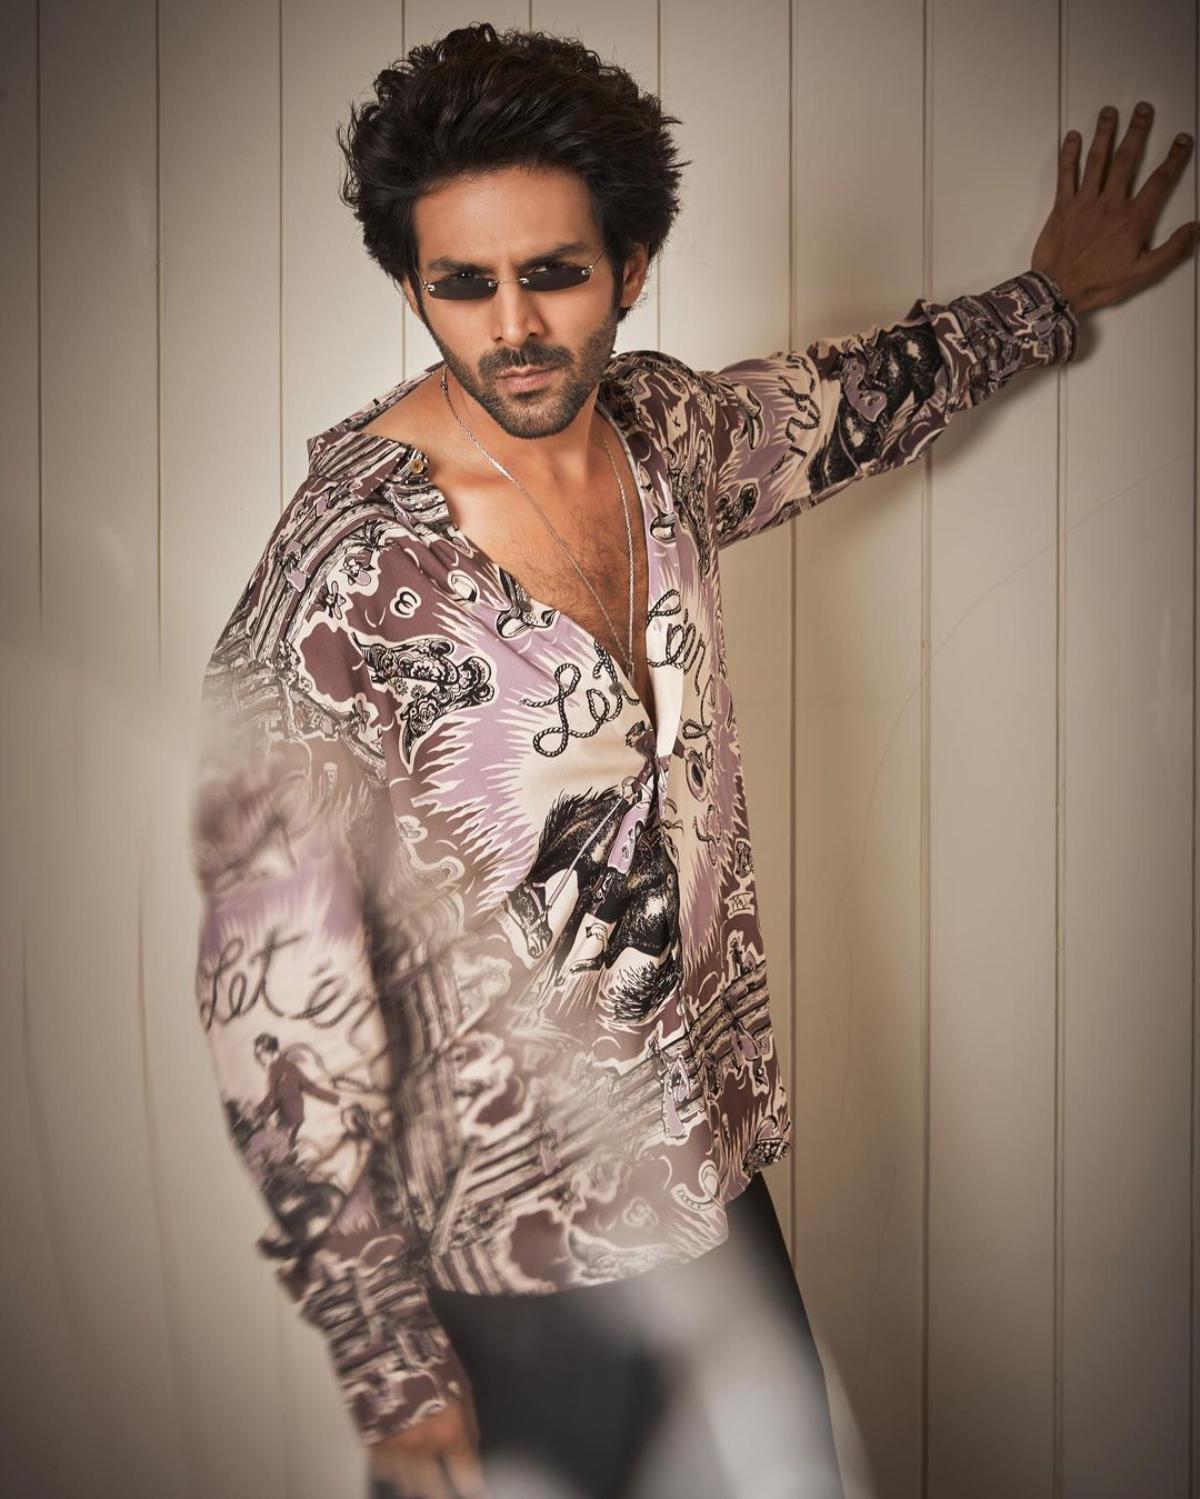 A printed shirt? Yes, please!
Well, well, well... men, if there's one ultimate party look of Kartik Aaryan from where you can take your fashion inspo from, it is THIS! A light coffee brown printed shirt with purple, white and black colour splattered all over, Kartik looks like a true-blue party animal who owns the dance floor with his killer moves. The actor who paired his printed shirt with something which appears to be a black skinny jeans, raised the temperature as he left the 4-5 buttons of his shirt undone. To take his hotness a notch higher, the actor wore his favourite, black sleek glasses. For the accessories, Kartik wore nothing but a long silver chain with a locket. With a sexy printed shirt like Kartik, we are sure you boys will make heads turn at parties.  